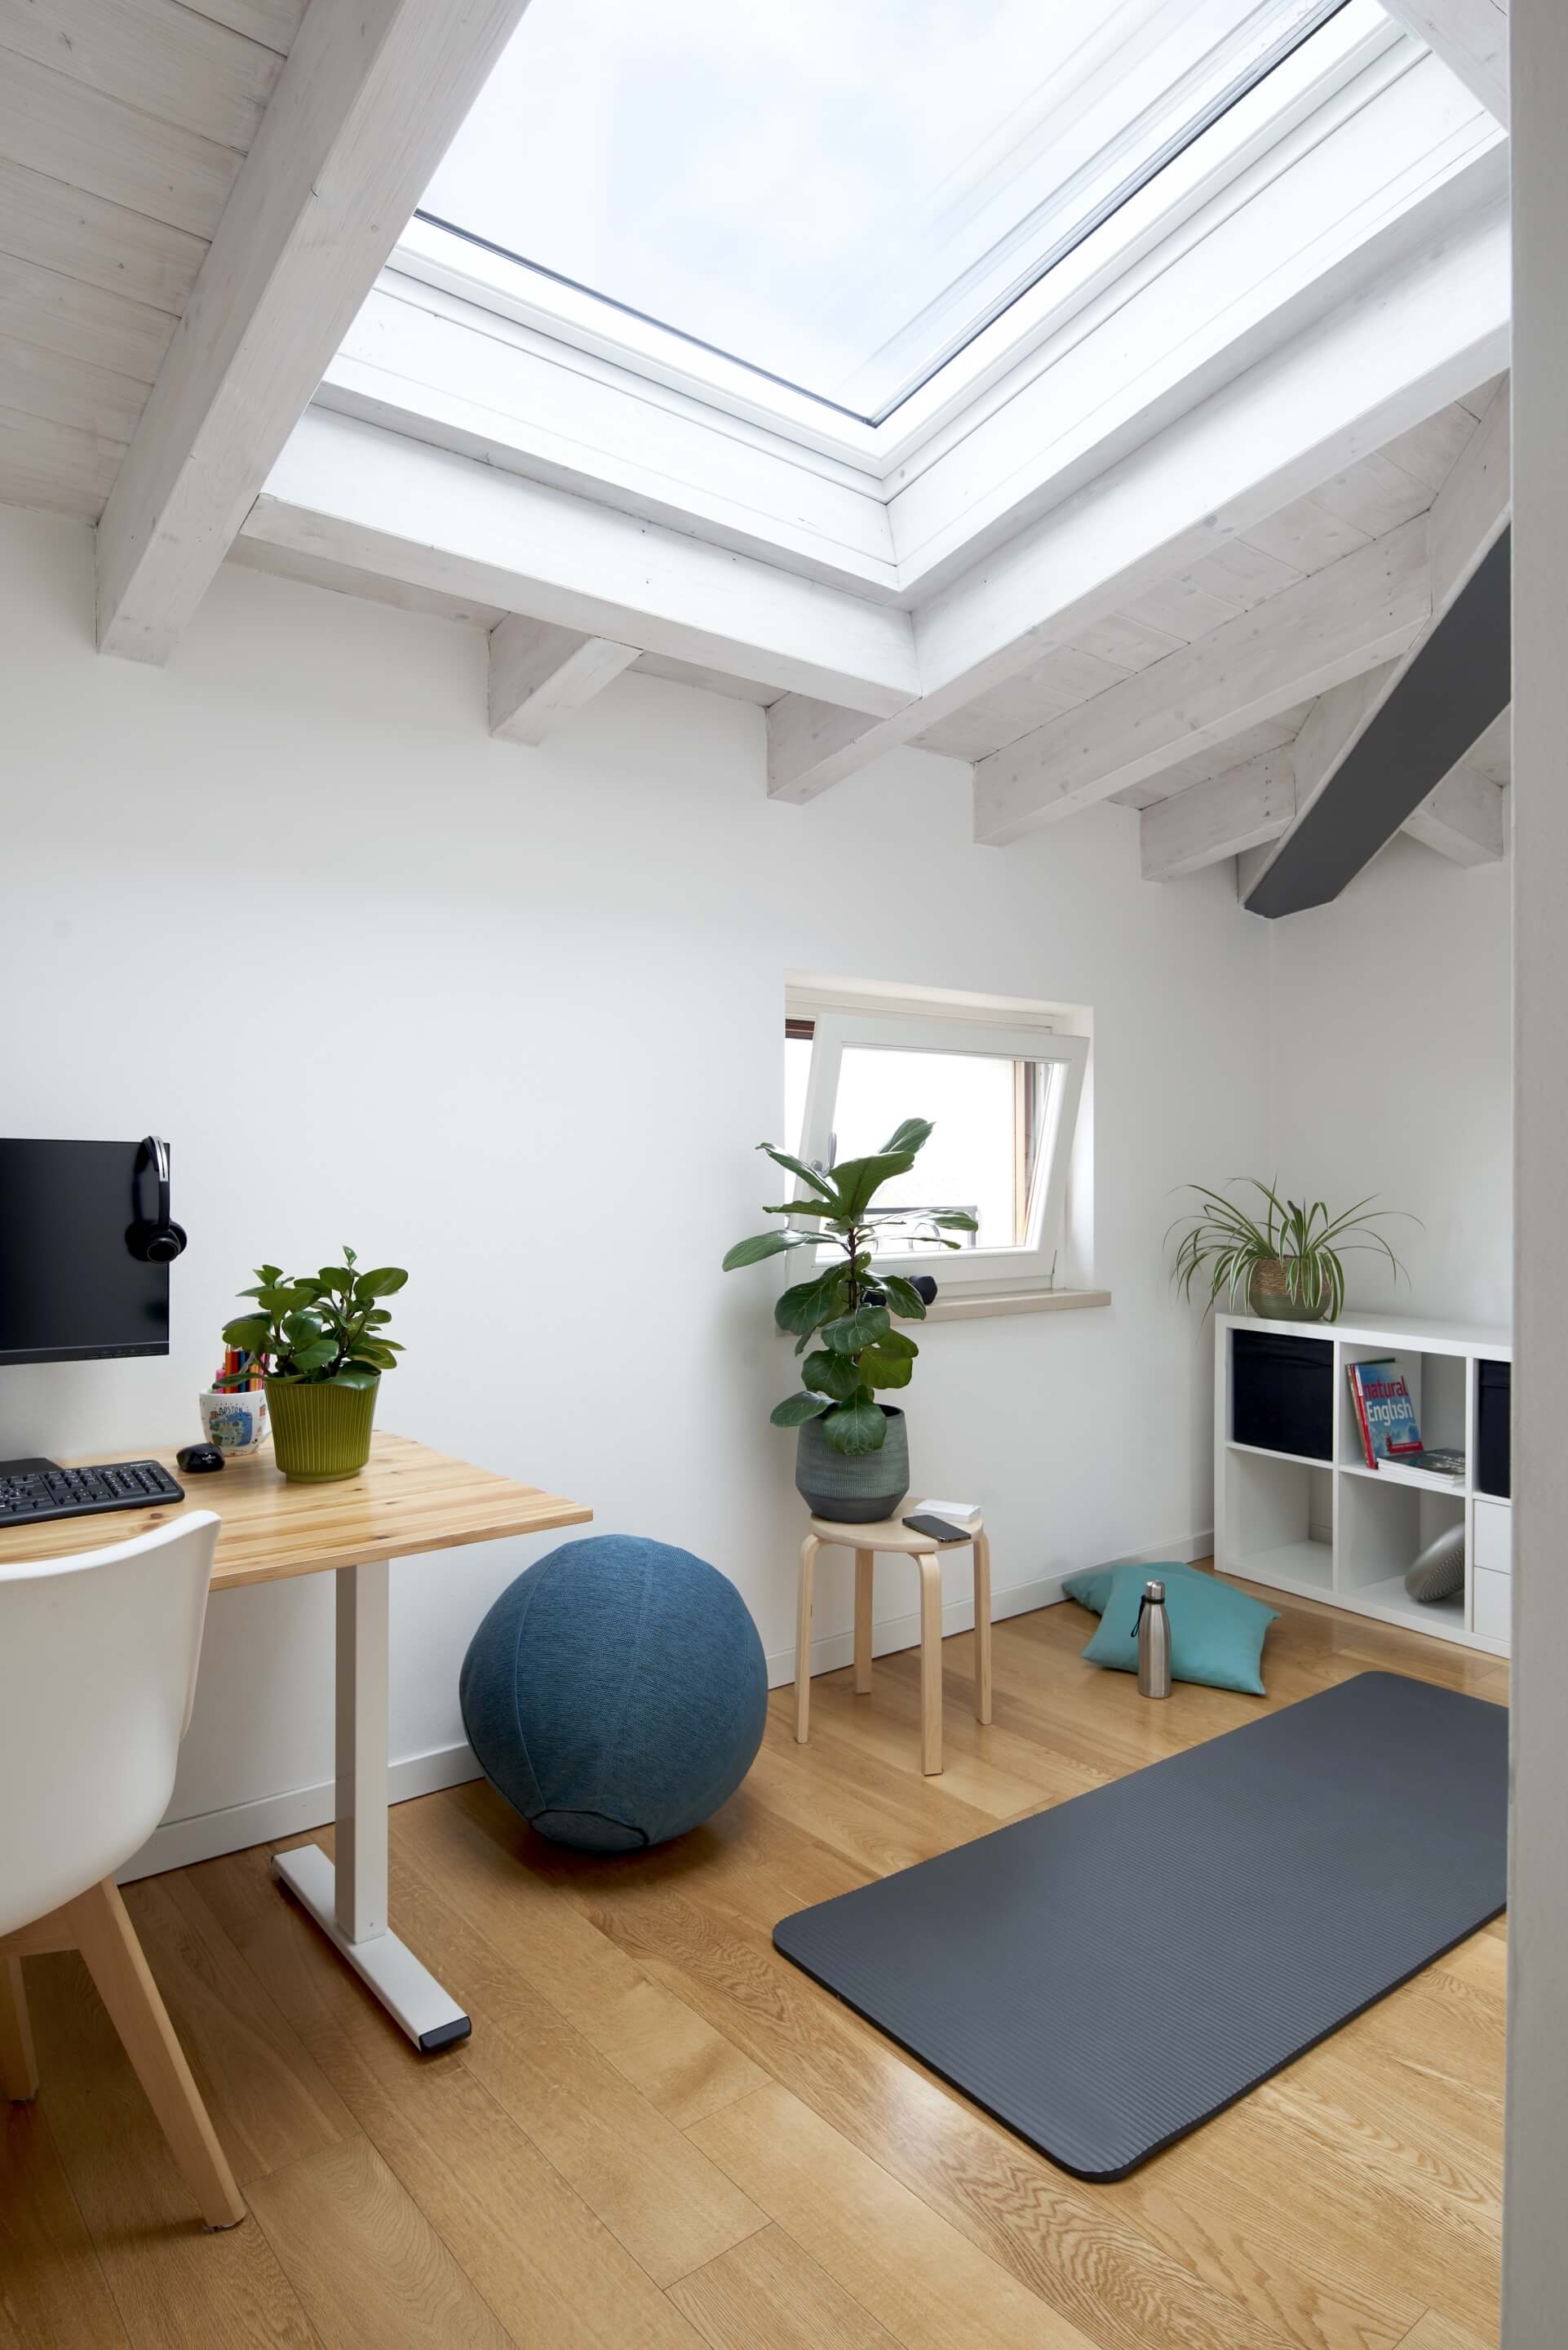 Home office area with some sports equipment on the floor and flat roof window that gives a lot of light in the room